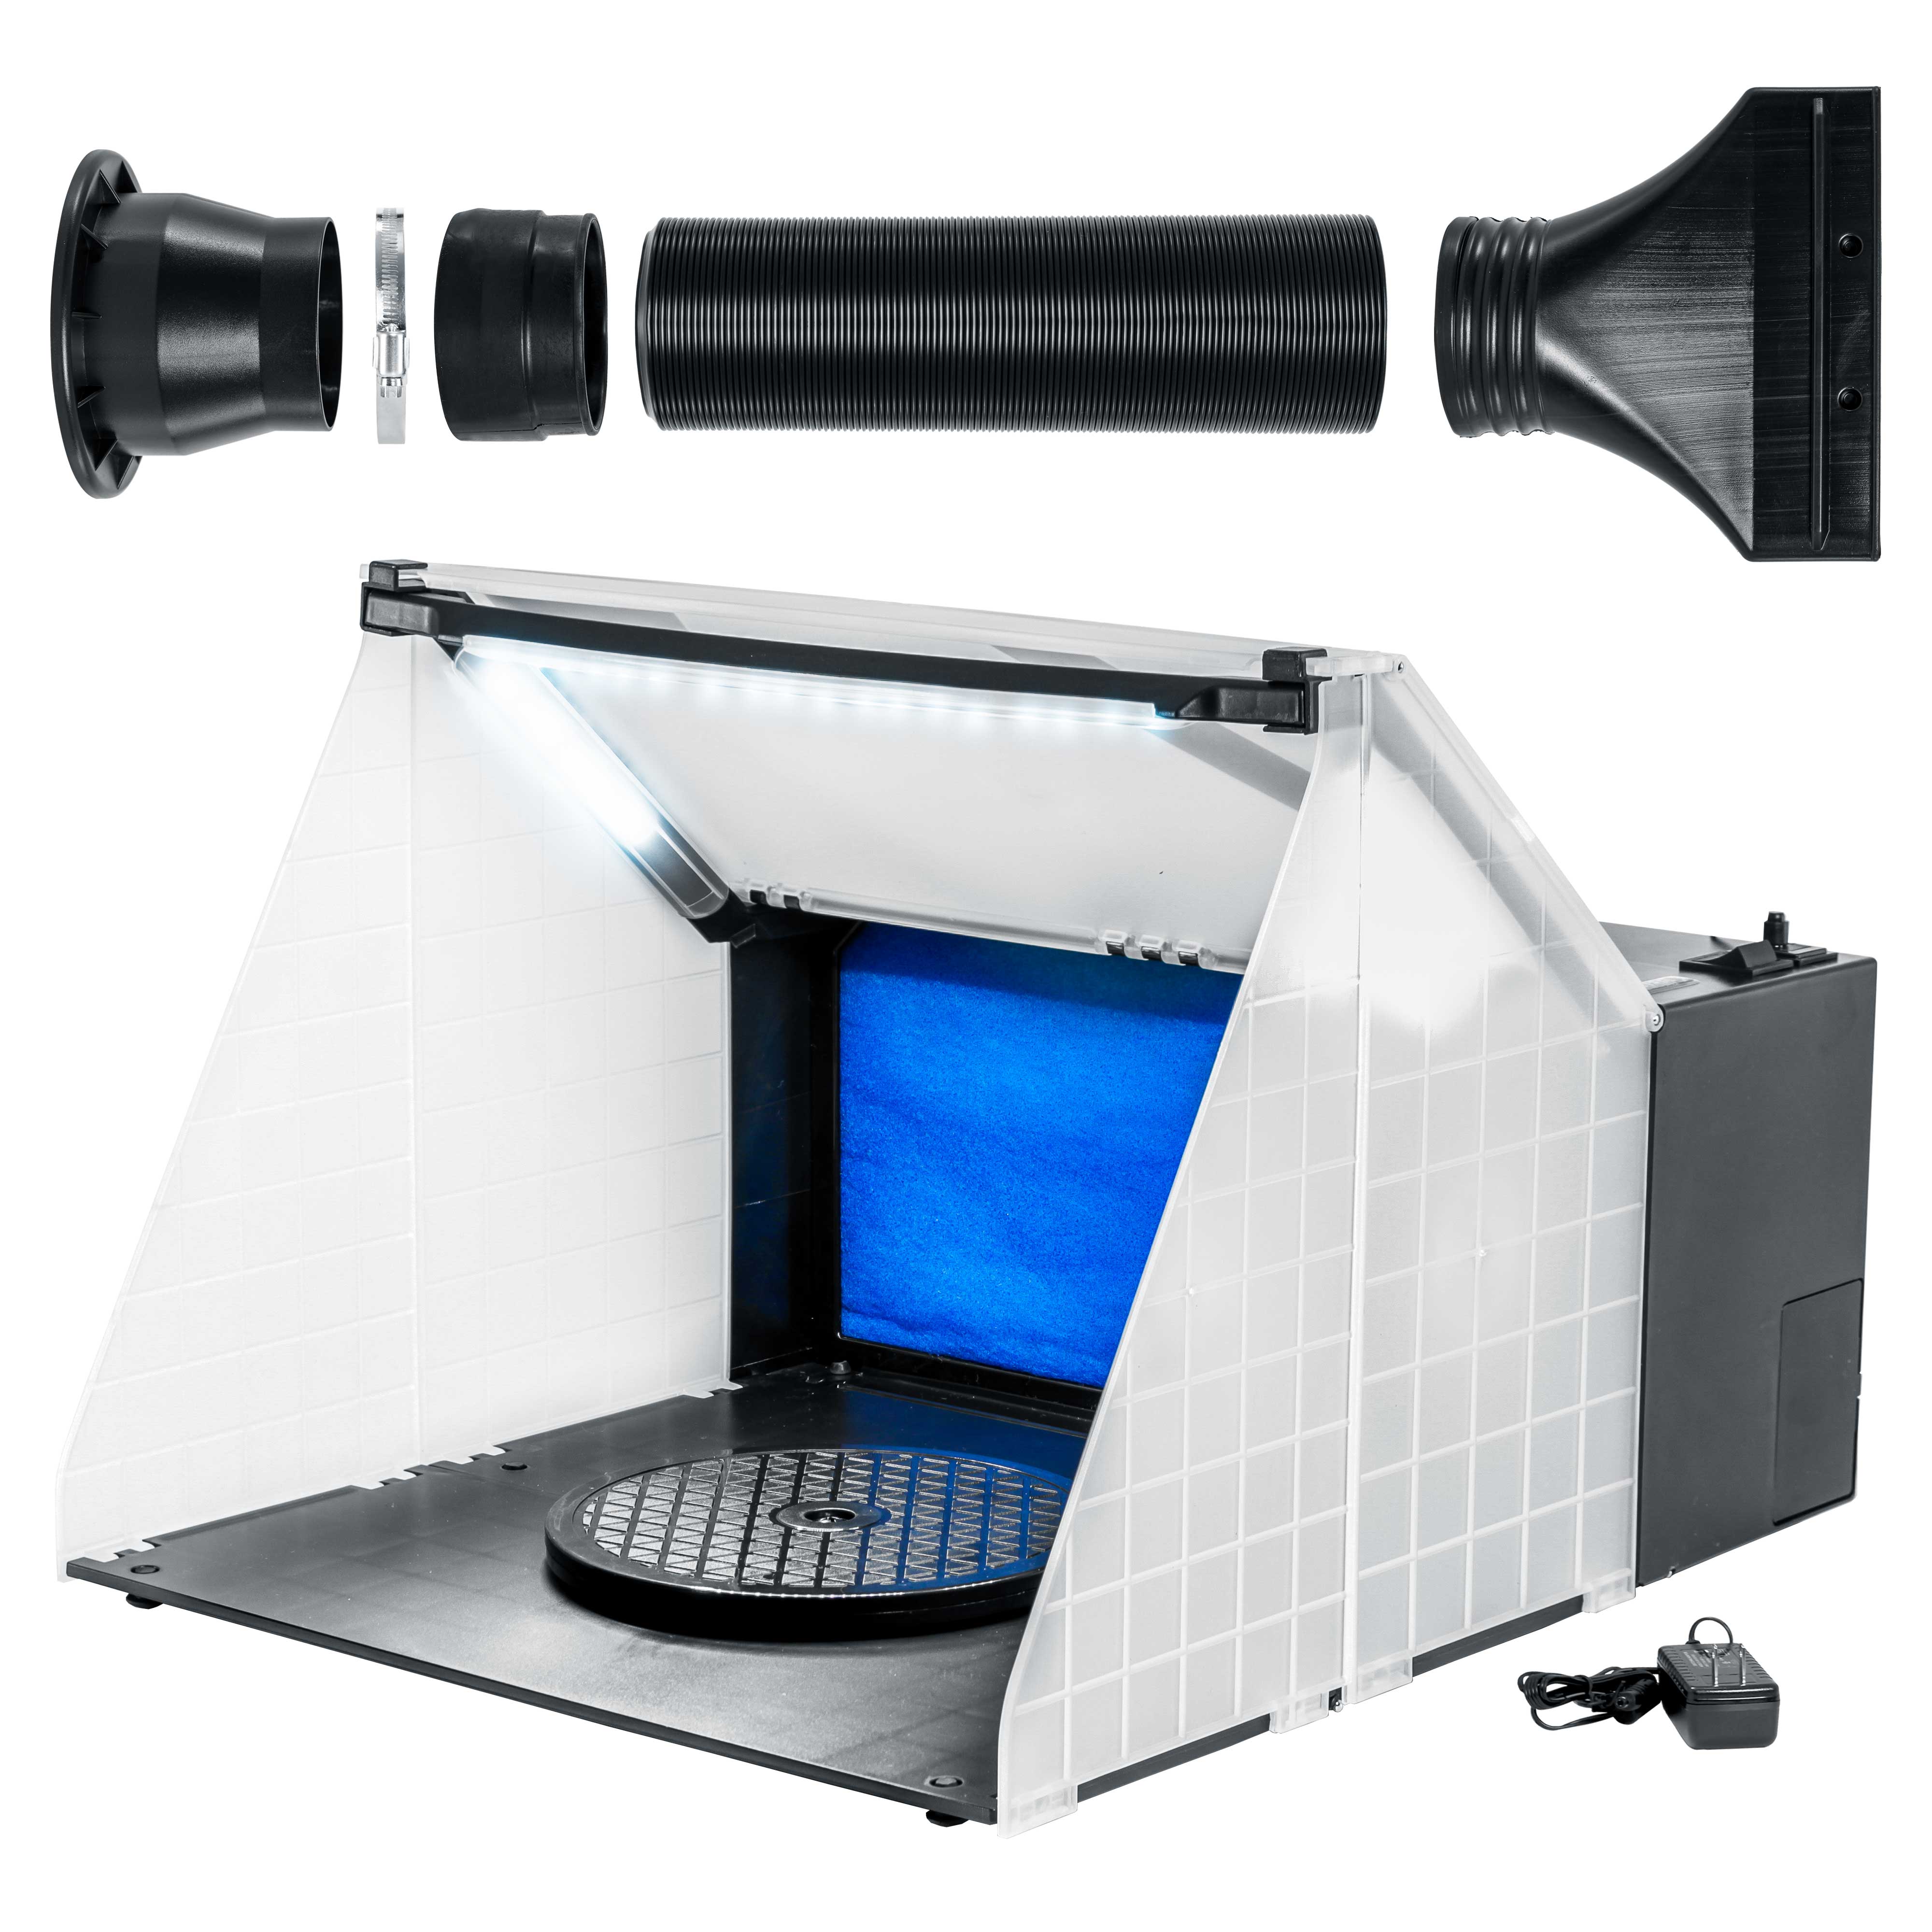 Image of Portable Hobby Airbrush Spray Booth Kit with LED Lights